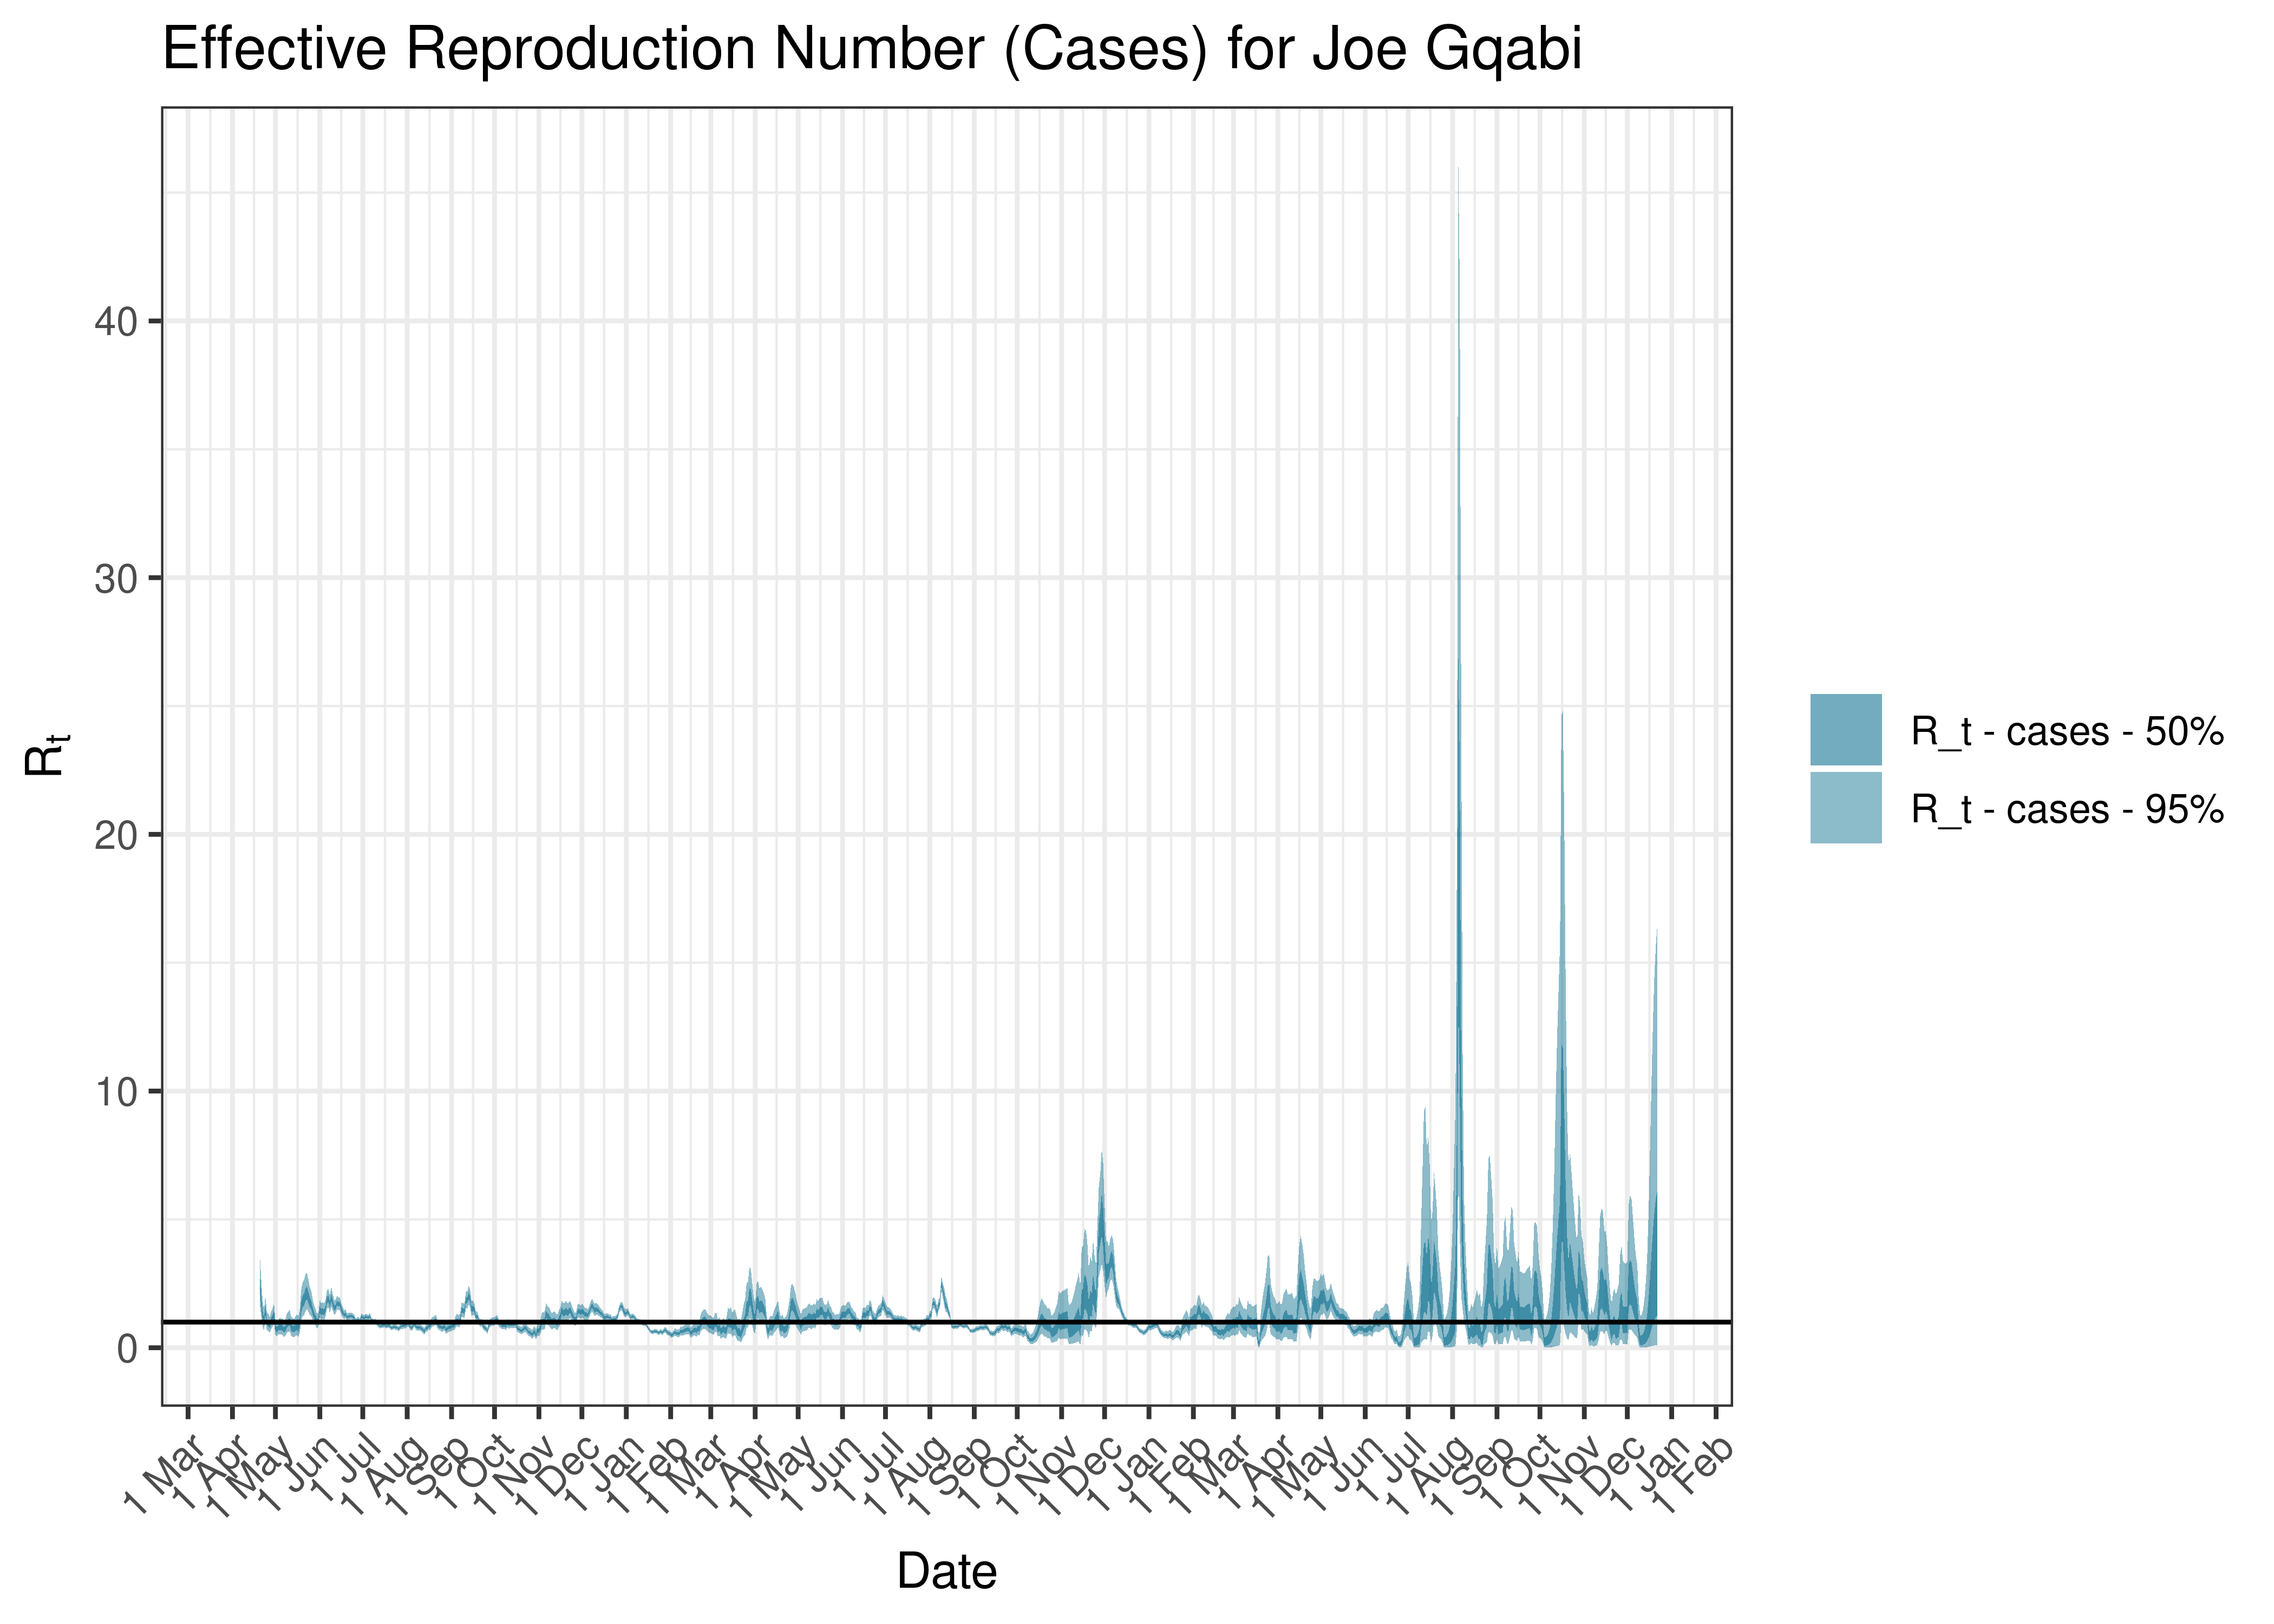 Estimated Effective Reproduction Number Based on Cases for Joe Gqabi since 1 April 2020